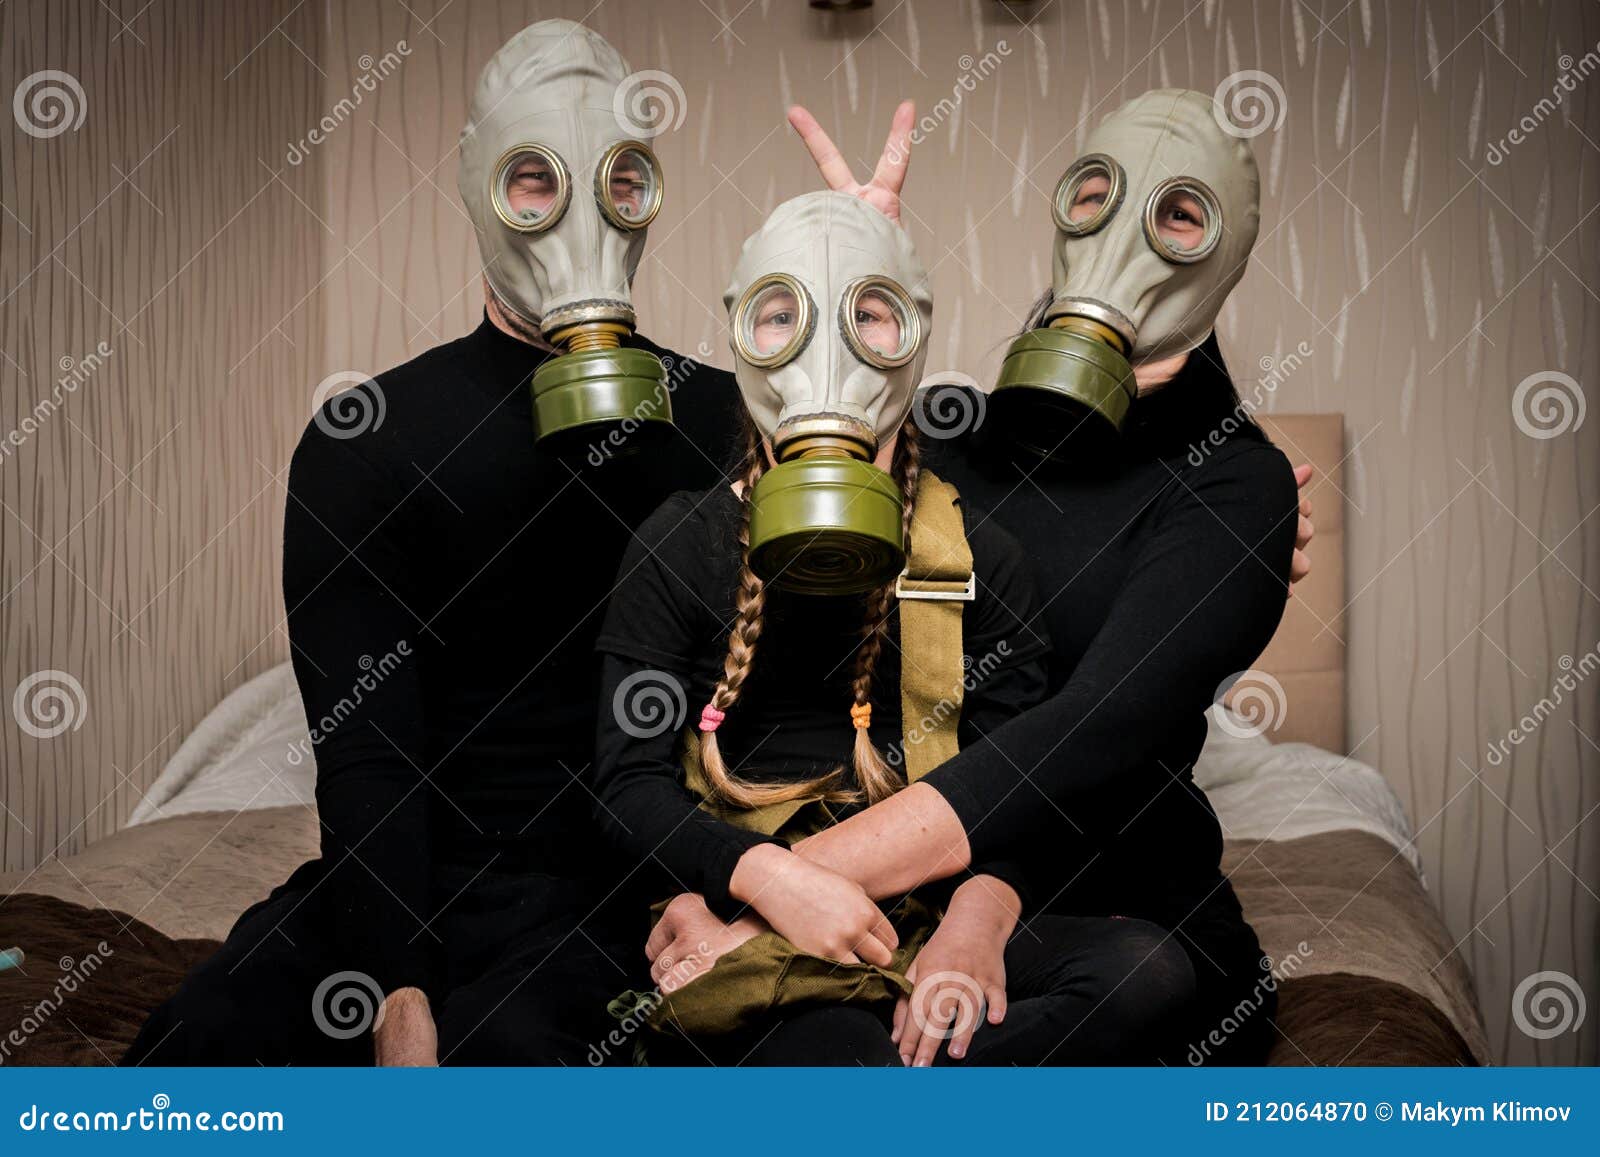 adjektiv kan opfattes Stillehavsøer A Family in Black Clothes and Gas Masks Sits on a Bed in Their Apartment.  the Father, Mother and Child Observe the Quarantine Stock Photo - Image of  funny, joke: 212064870